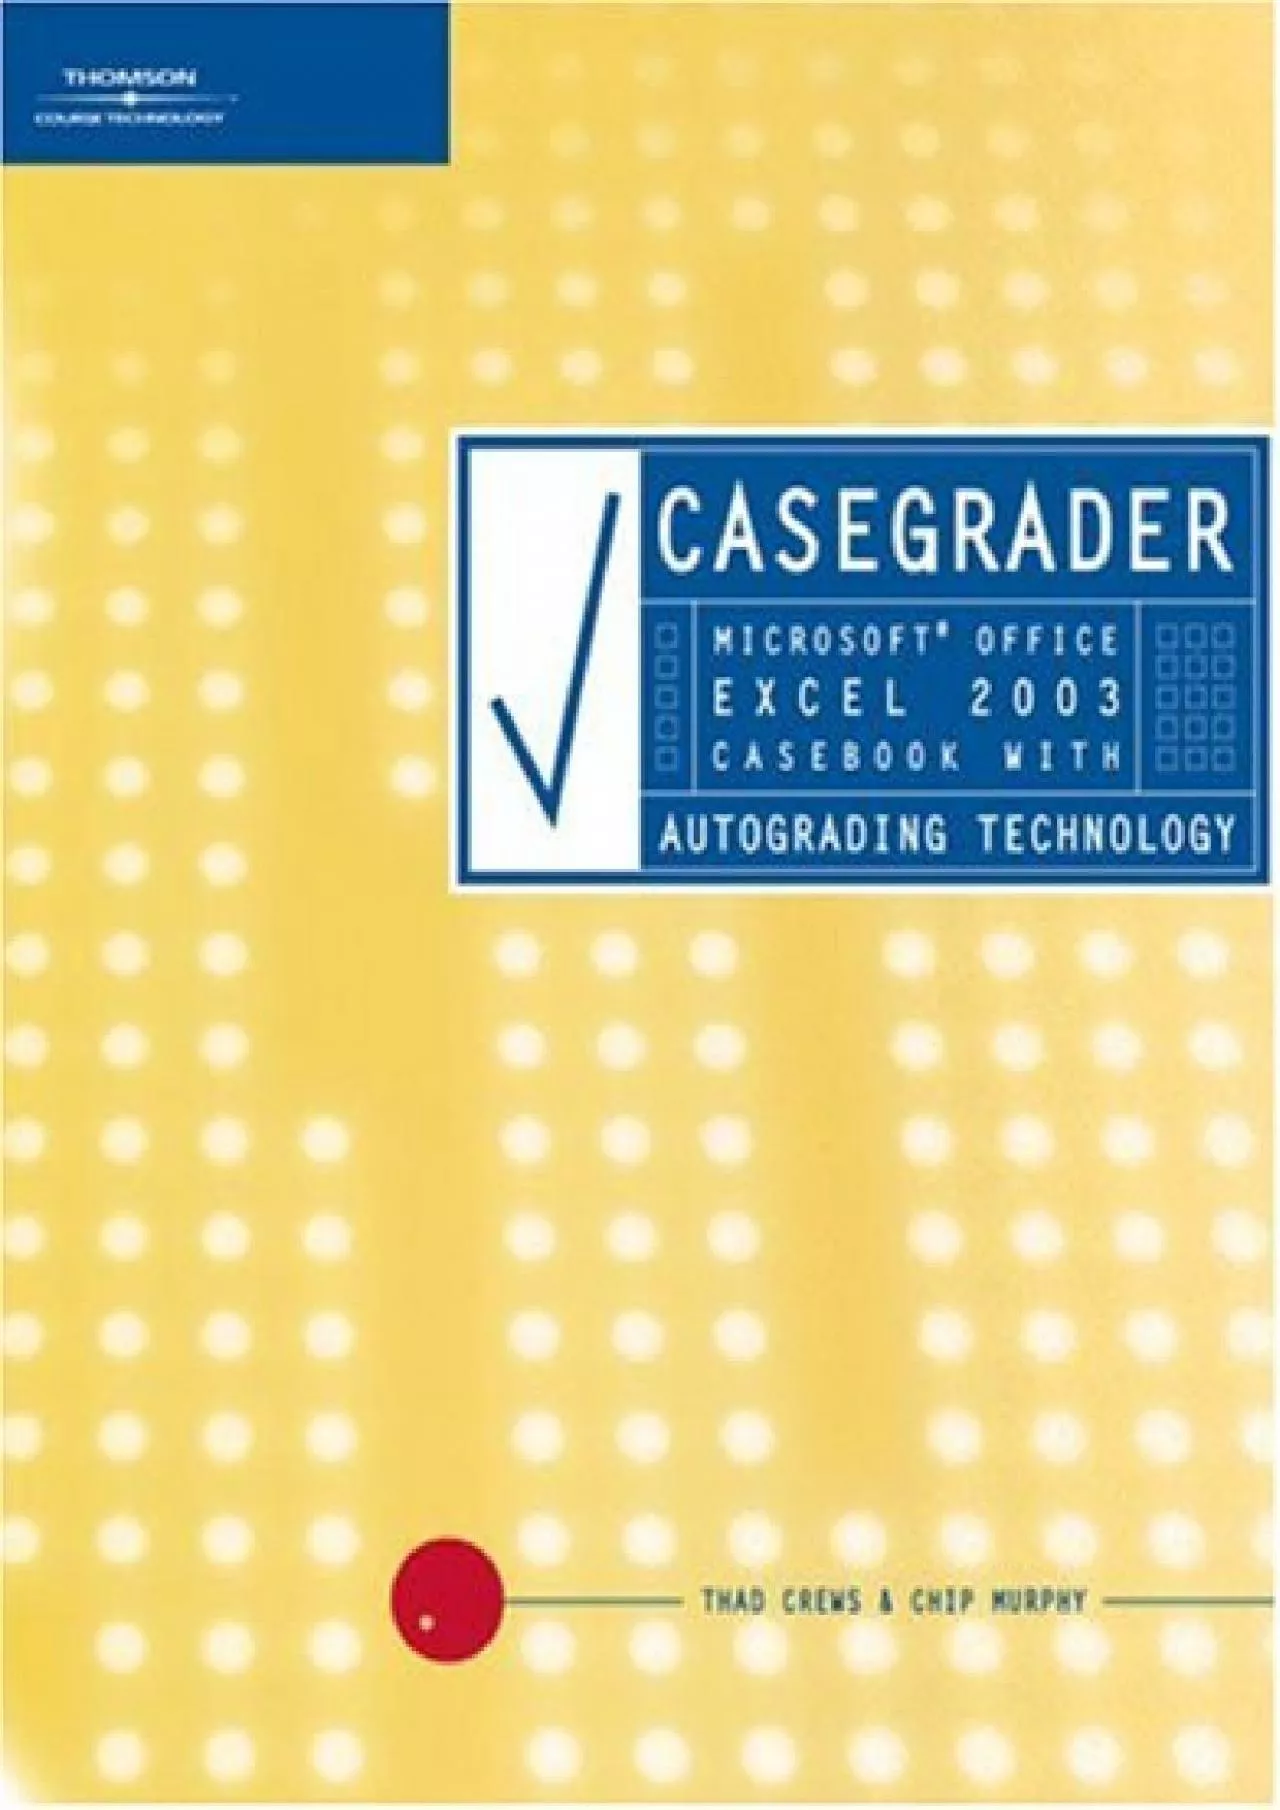 (DOWNLOAD)-CaseGrader: Microsoft Office Excel 2003 Casebook with Autograding Technology